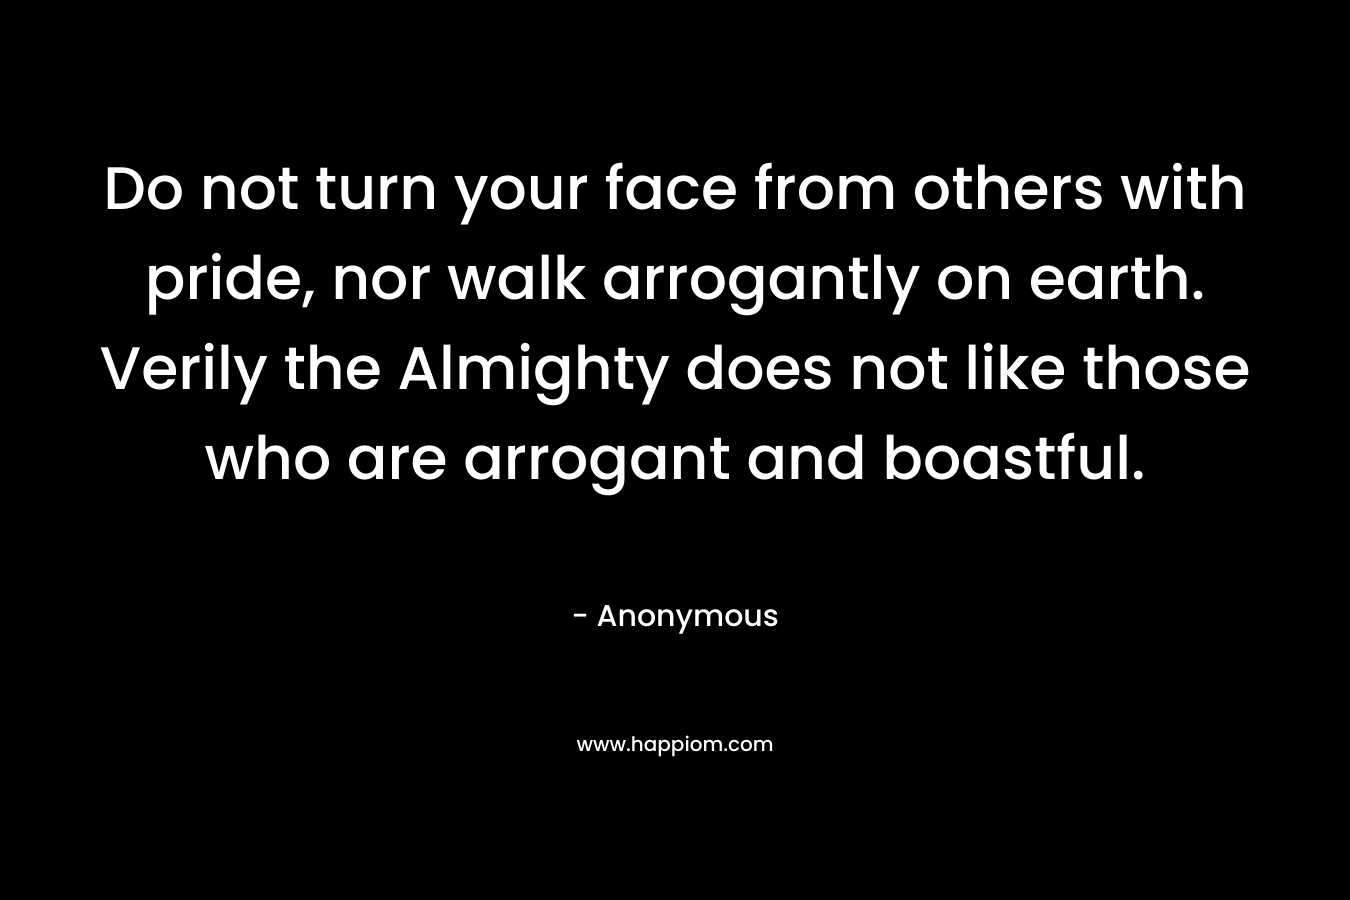 Do not turn your face from others with pride, nor walk arrogantly on earth. Verily the Almighty does not like those who are arrogant and boastful. – Anonymous